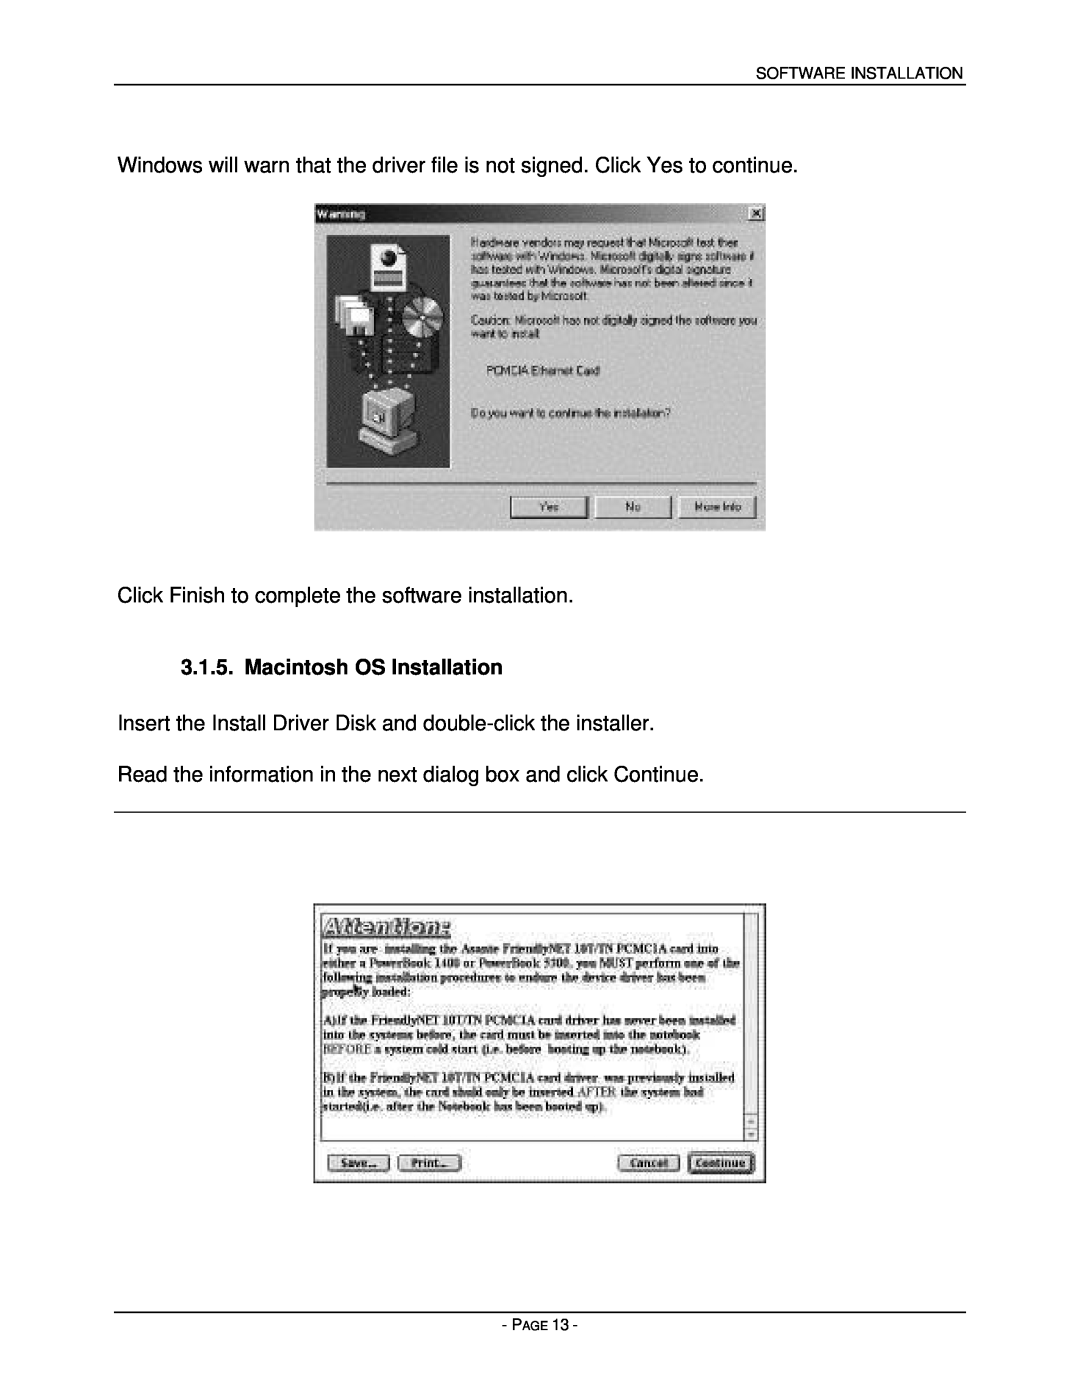 Asante Technologies PCMCIA user manual Macintosh OS Installation, Click Finish to complete the software installation, Page 